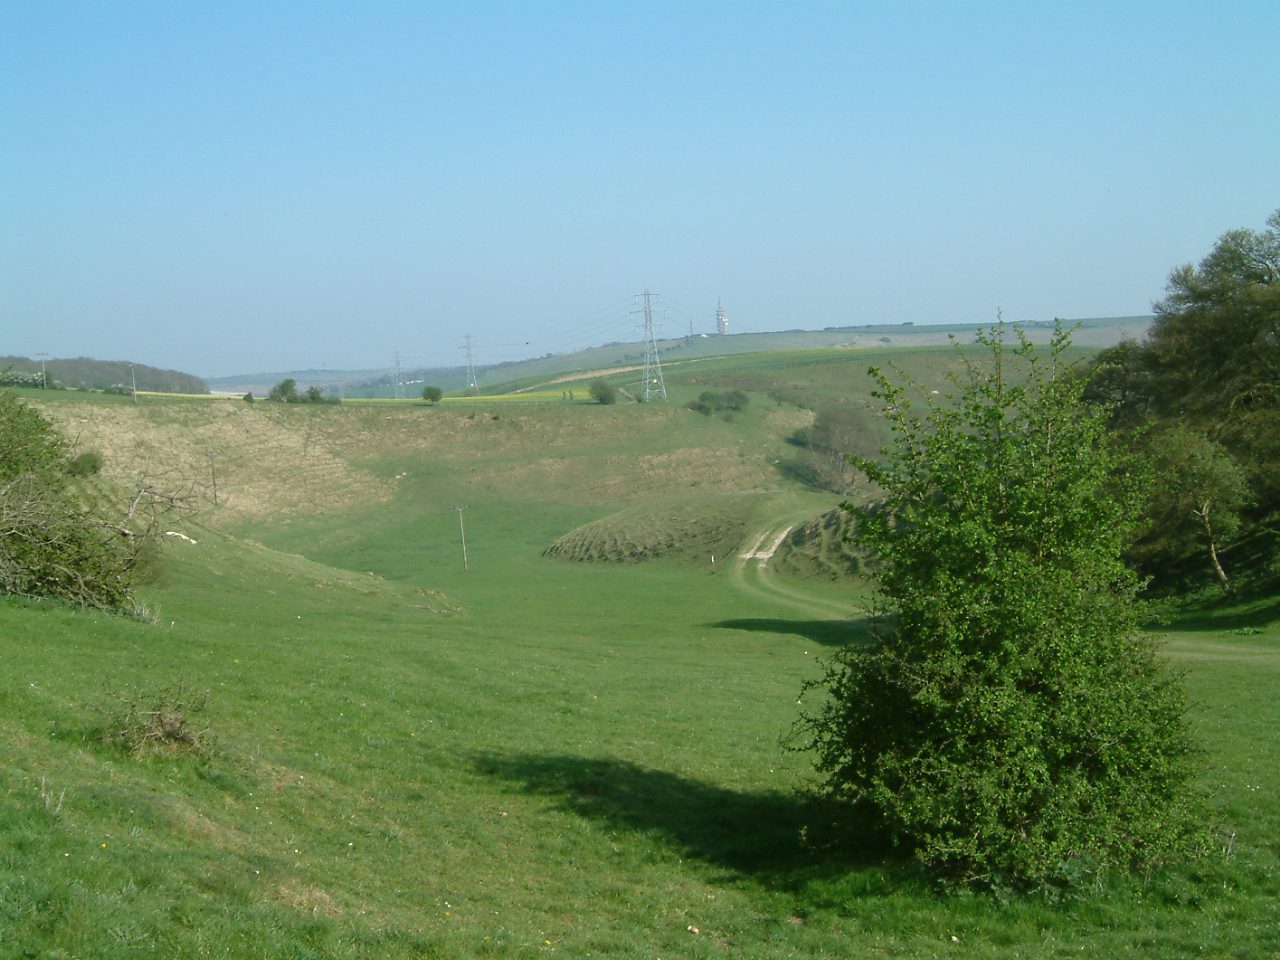 View across Farthing Common. Grass fields with some hedges.